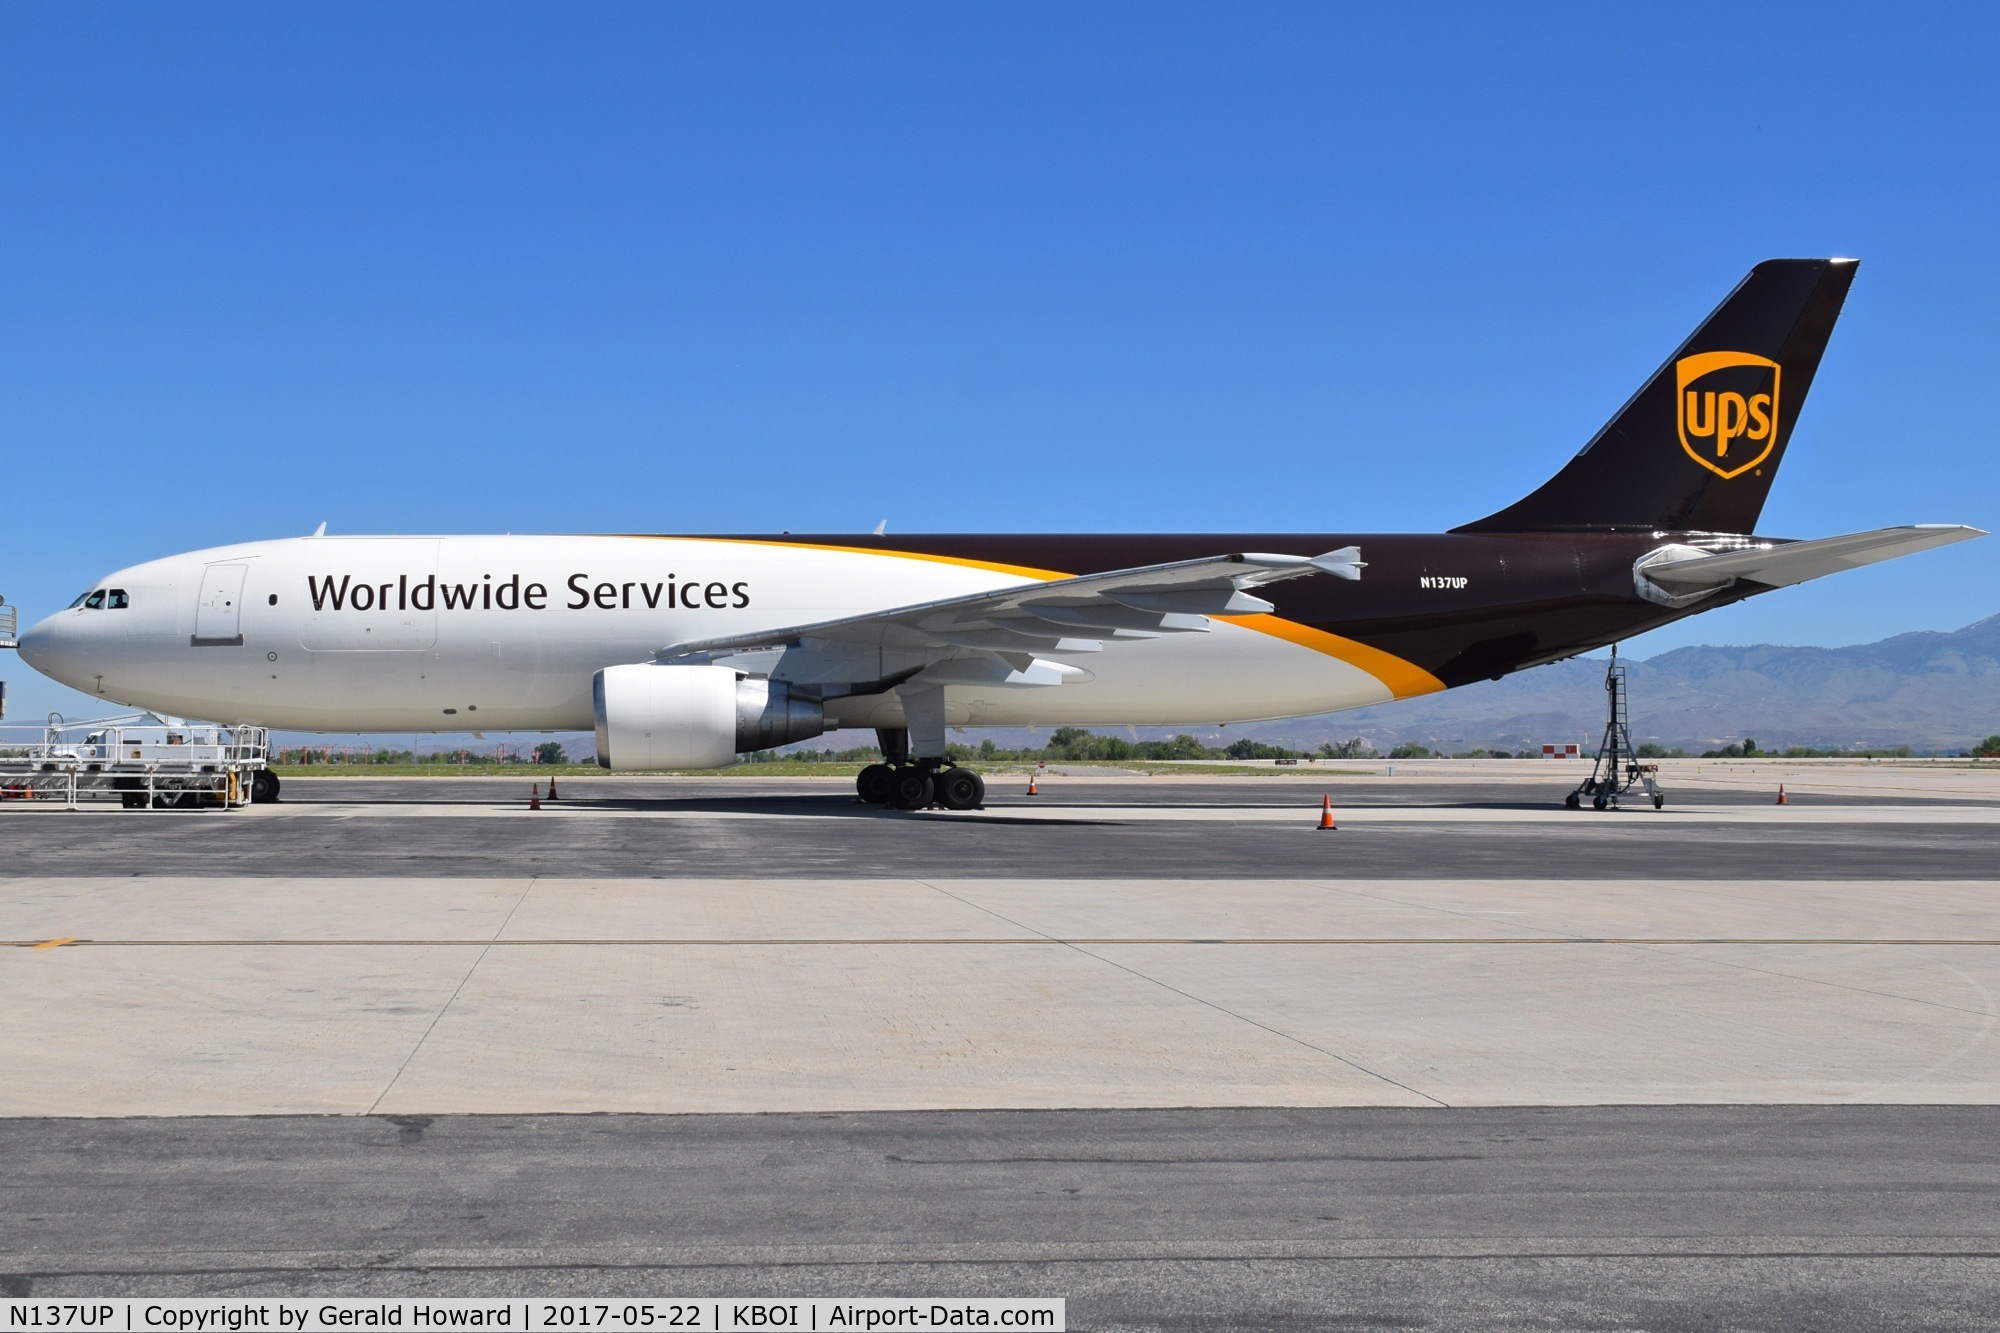 N137UP, 2001 Airbus A300F4-622R C/N 820, Parked on the UPS ramp.